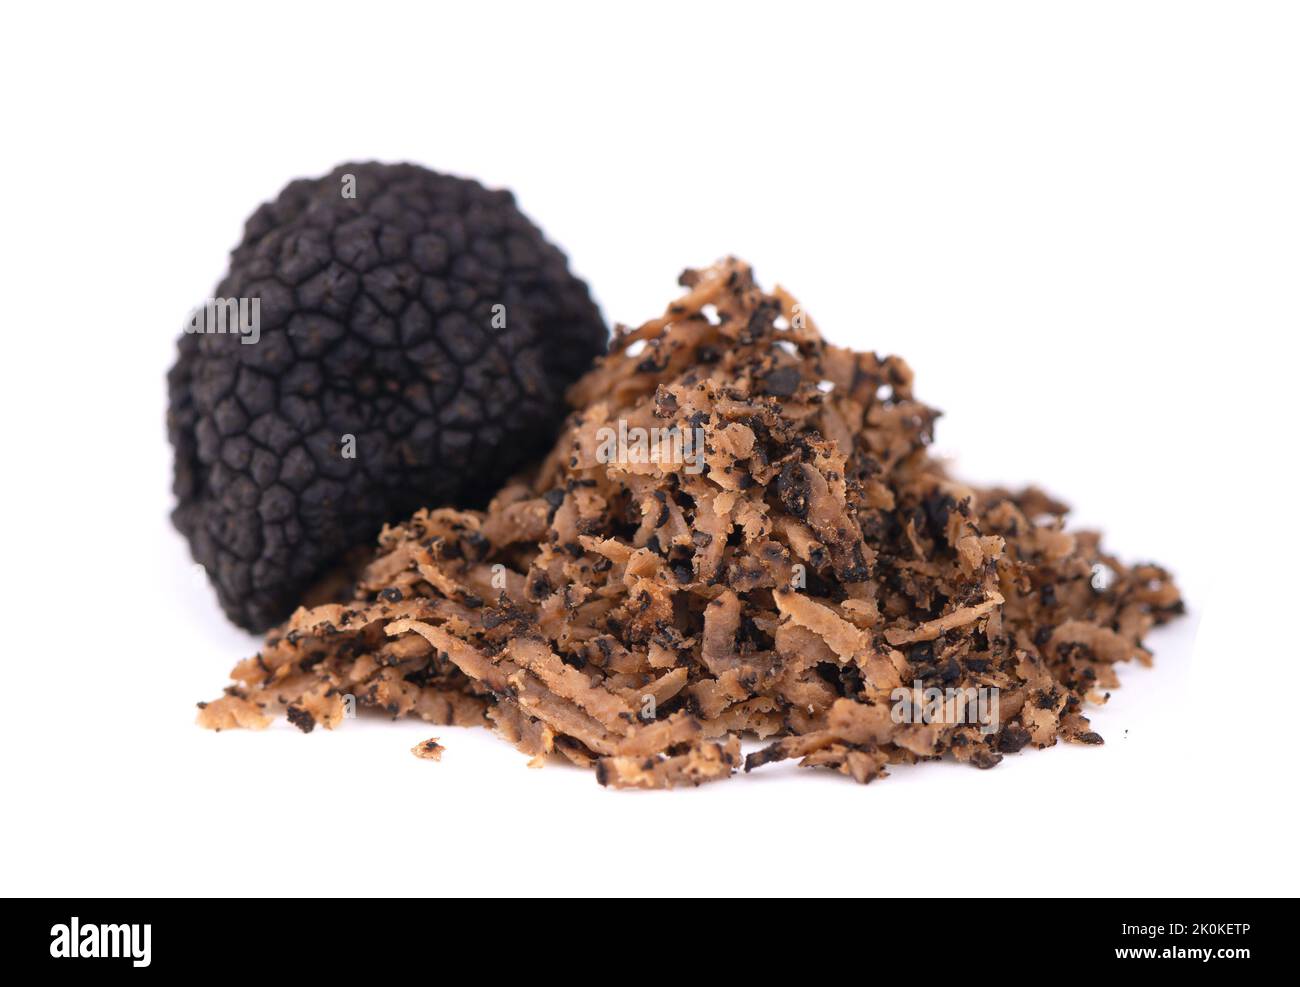 Black truffles isolated on a white background. Fresh sliced truffle. Delicacy exclusive truffle mushroom. Piquant and fragrant French delicacy. Clippi Stock Photo